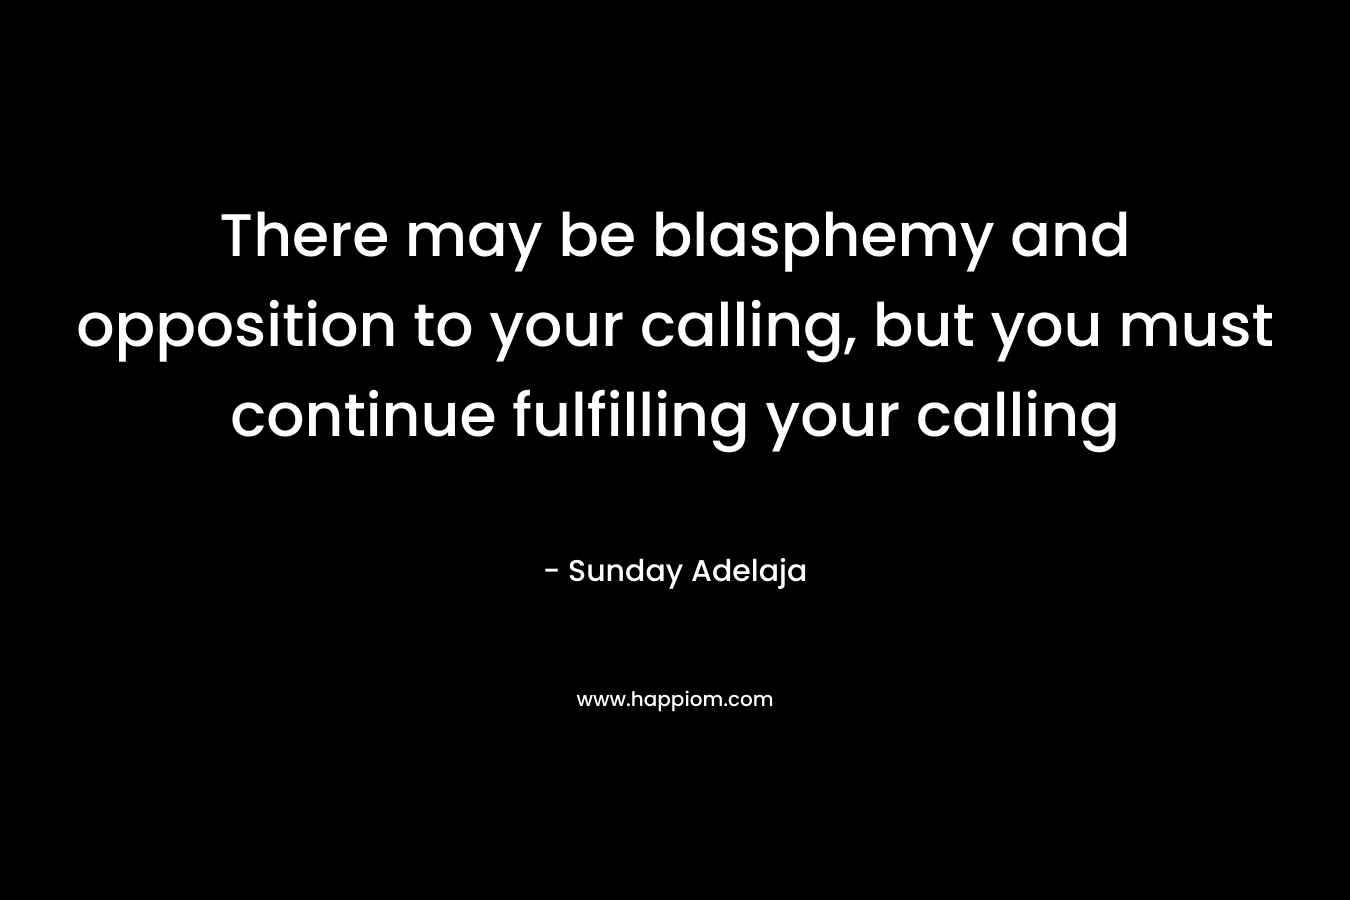 There may be blasphemy and opposition to your calling, but you must continue fulfilling your calling